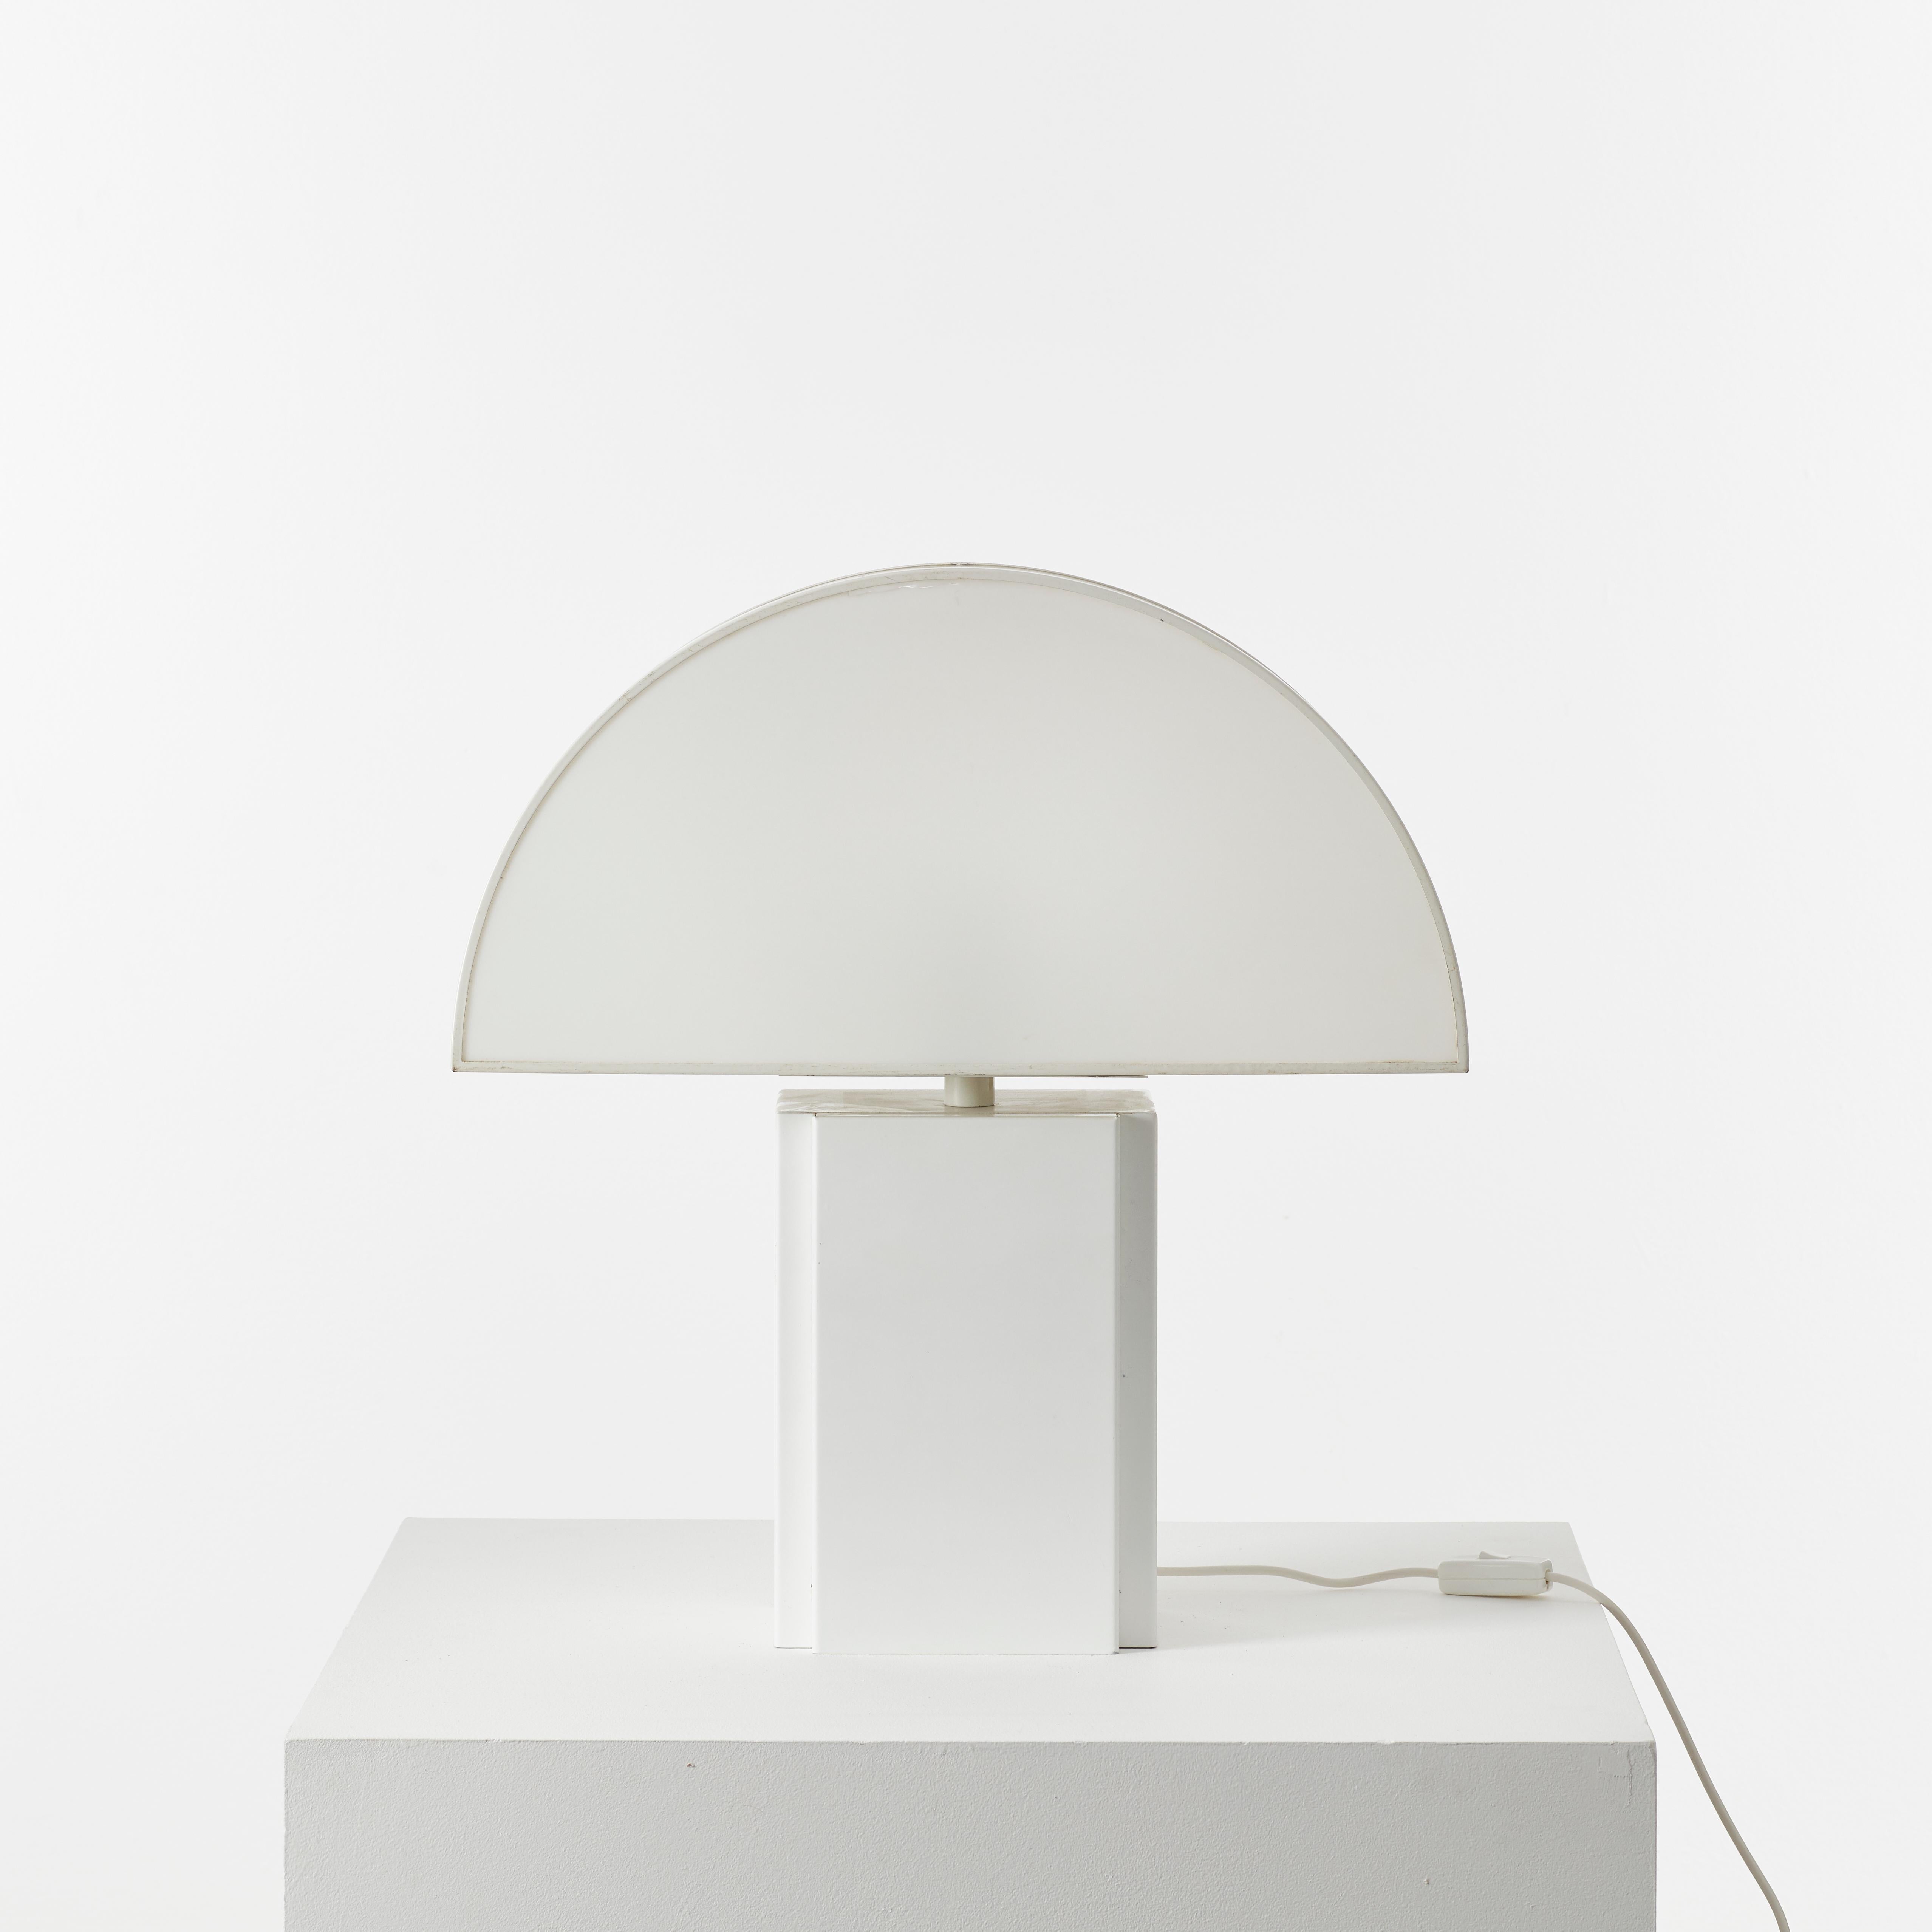 Large Olympe table lamp designed by Harvey Guzzini for ED, Italy 1970s. The demi-lune shade is particularly pleasing lit, a half moon of ambient light through semi-opaque acrylic. It has a metal base and a plastic shade, open at the back for ease of